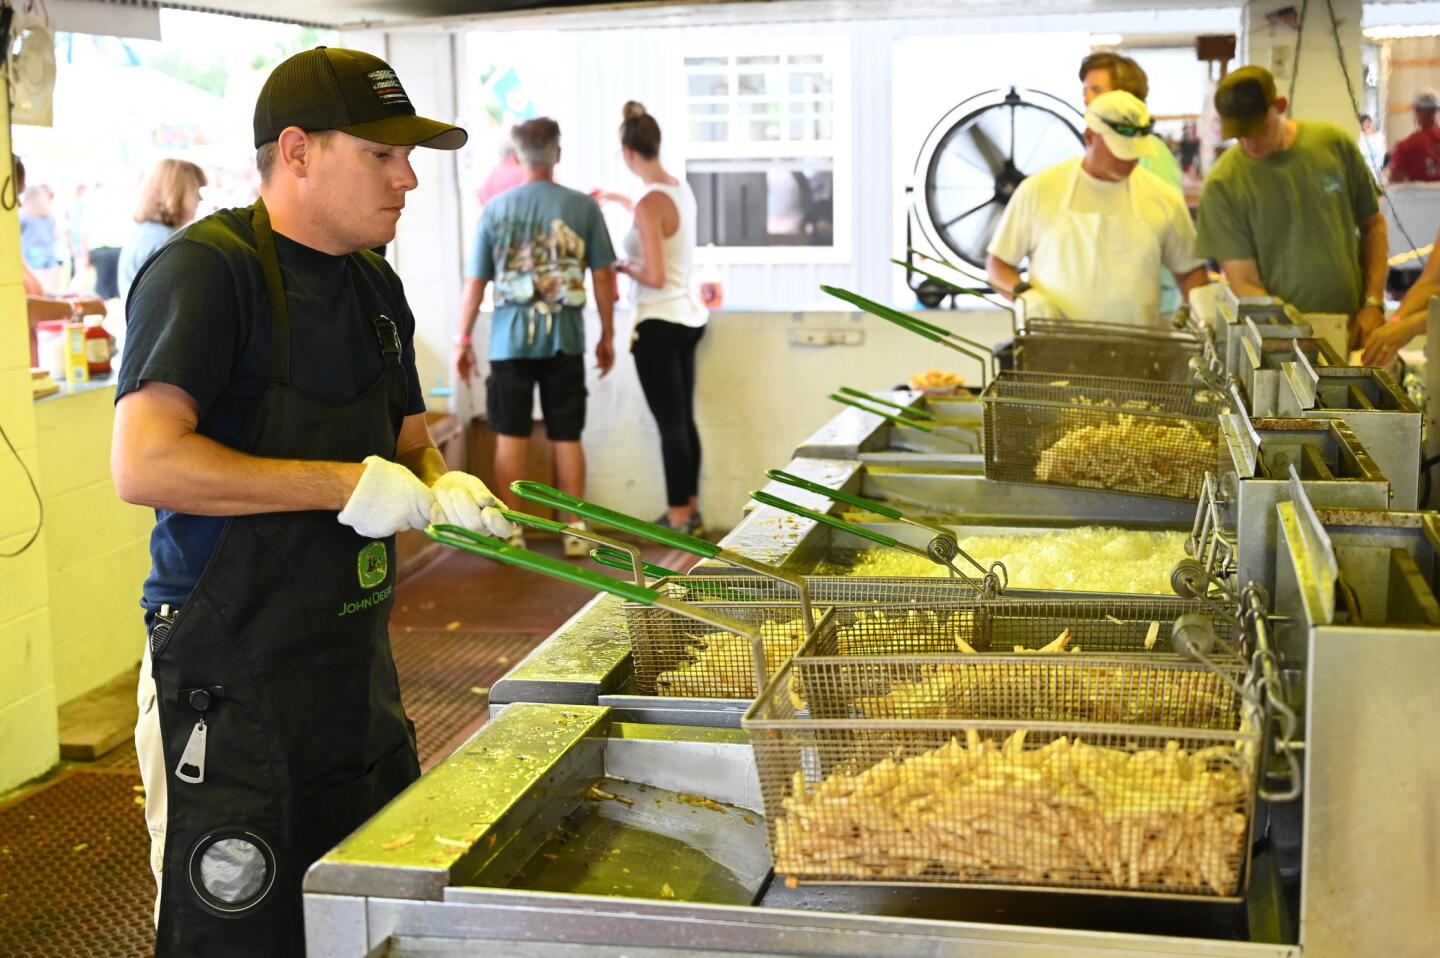 Jeff Schaeffer dips french fries in hot oil, preparing orders for fairgoers during the carnival at Reese & Community Volunteer Fire Company on Tuesday, July 16.